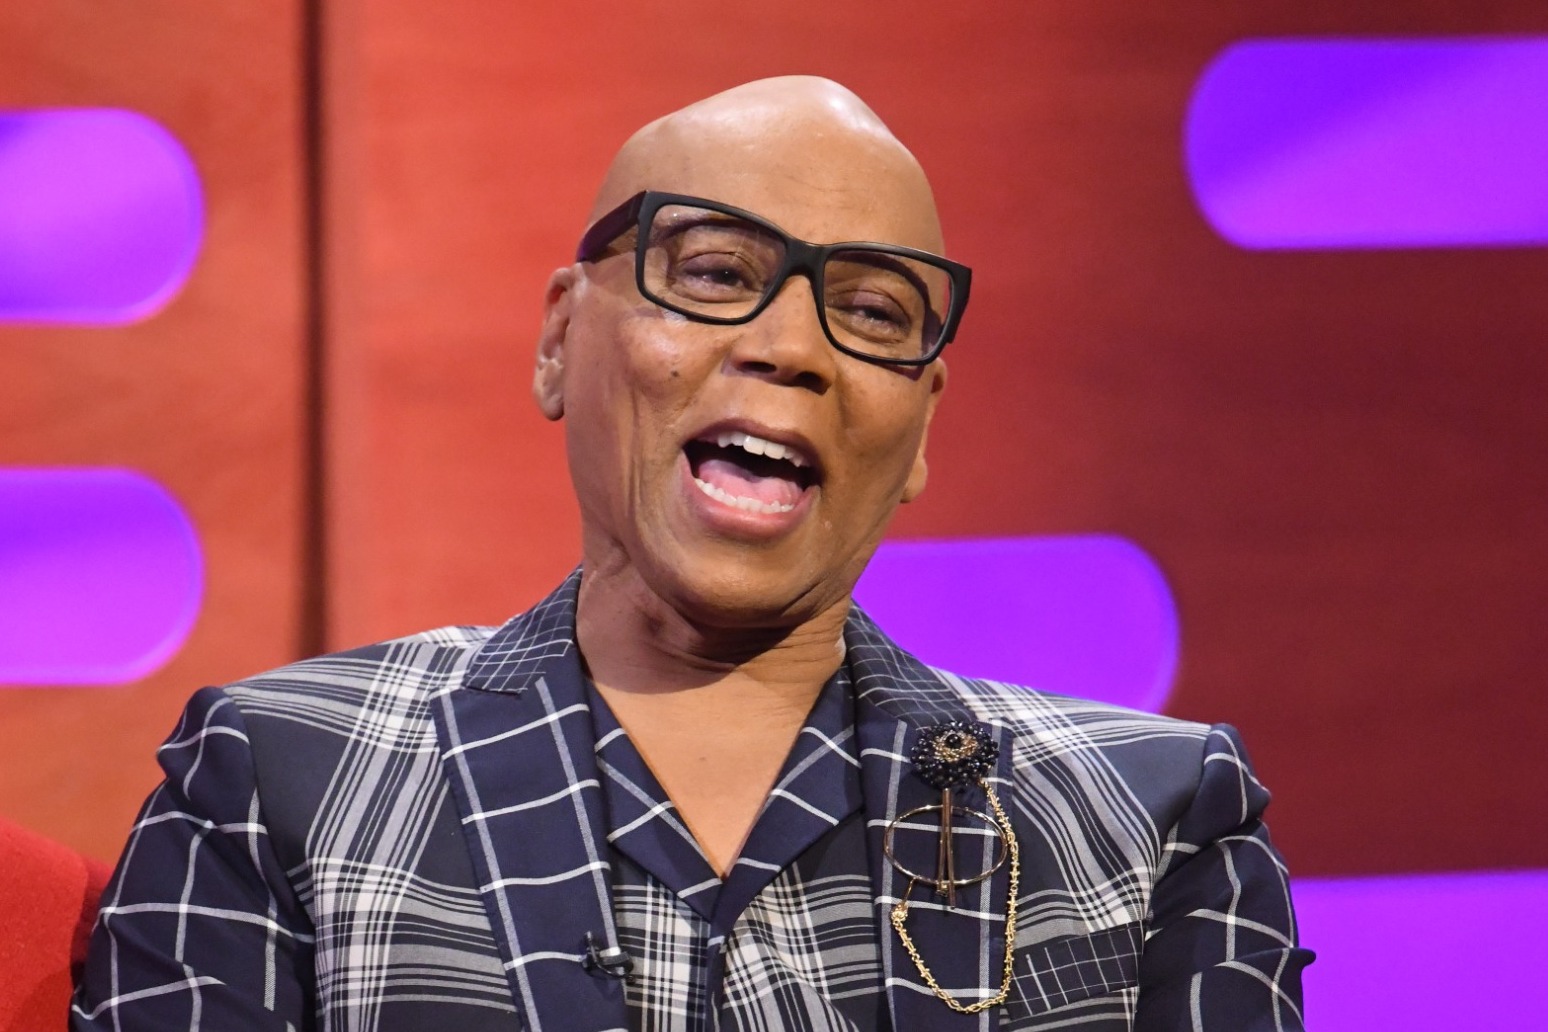 RuPaul to host celebrity spin-off of ITV game show 